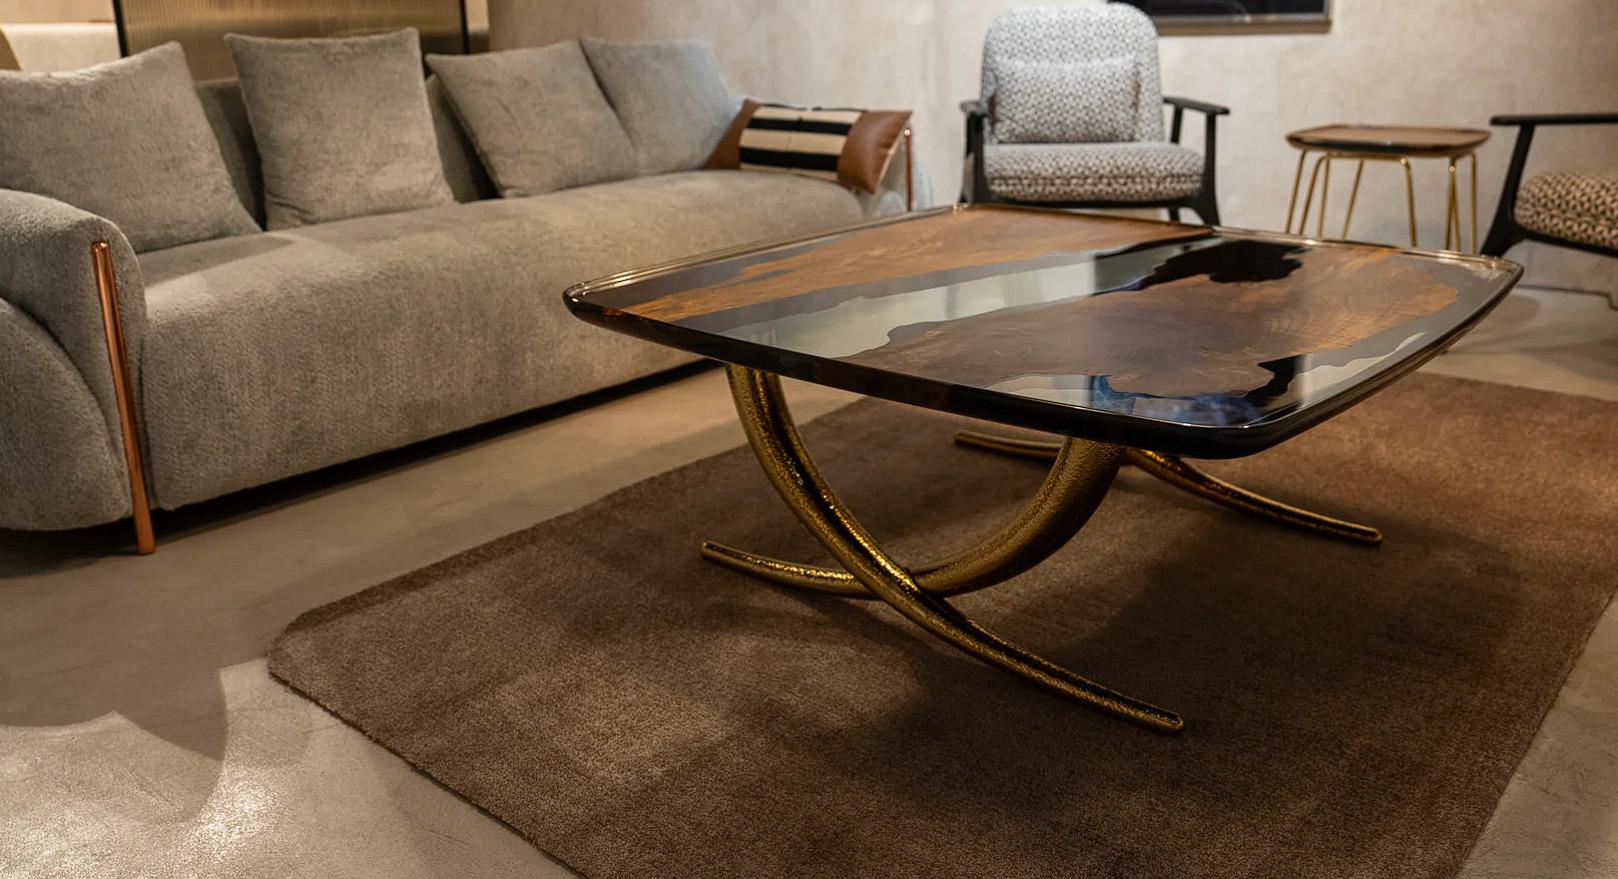 A genuine masterpiece of artisanal furniture. Crafted from the finest quality walnut wood, this coffee table emanates an aura of refined elegance and sophistication. 

The use of crystal clear resin to fill the natural crevices and knots in the wood